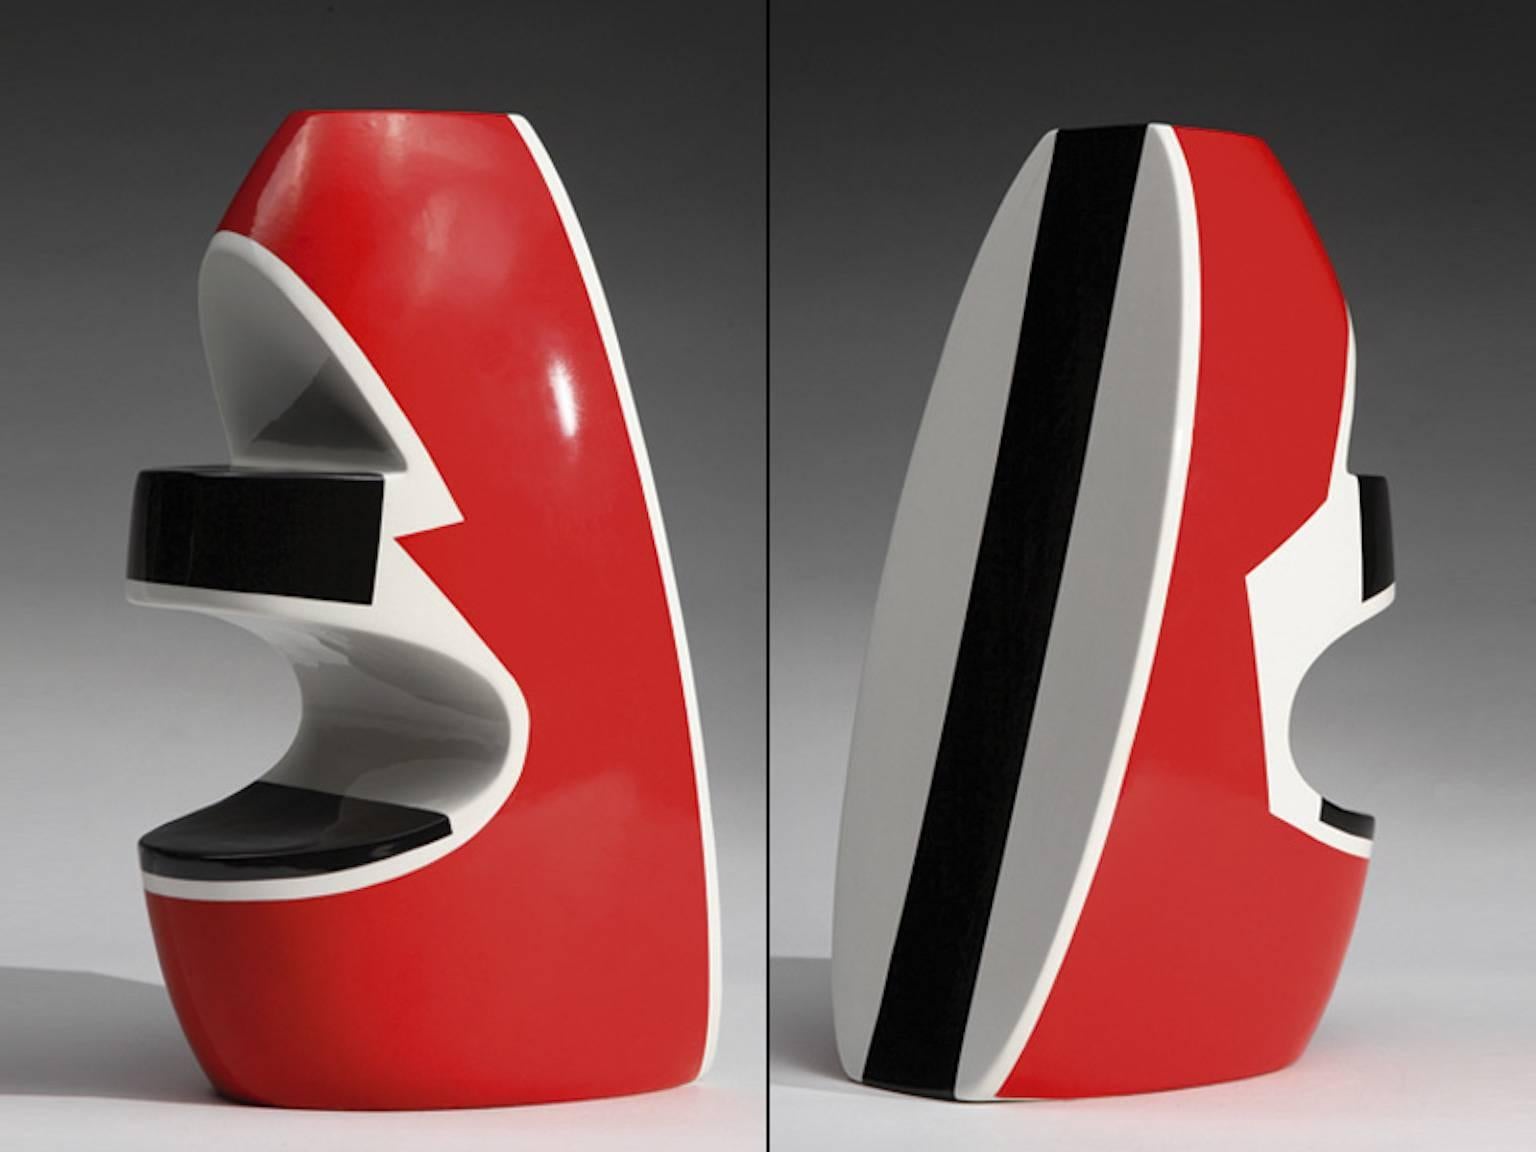 Red ceramic vase “RedYellowBlack” collection, designed by George Sowden and produced by Superego Editions. Limited edition of 50 pieces. Signed and numbered.

Biography
George J. Sowden is a designer with experience in various fields of industrial